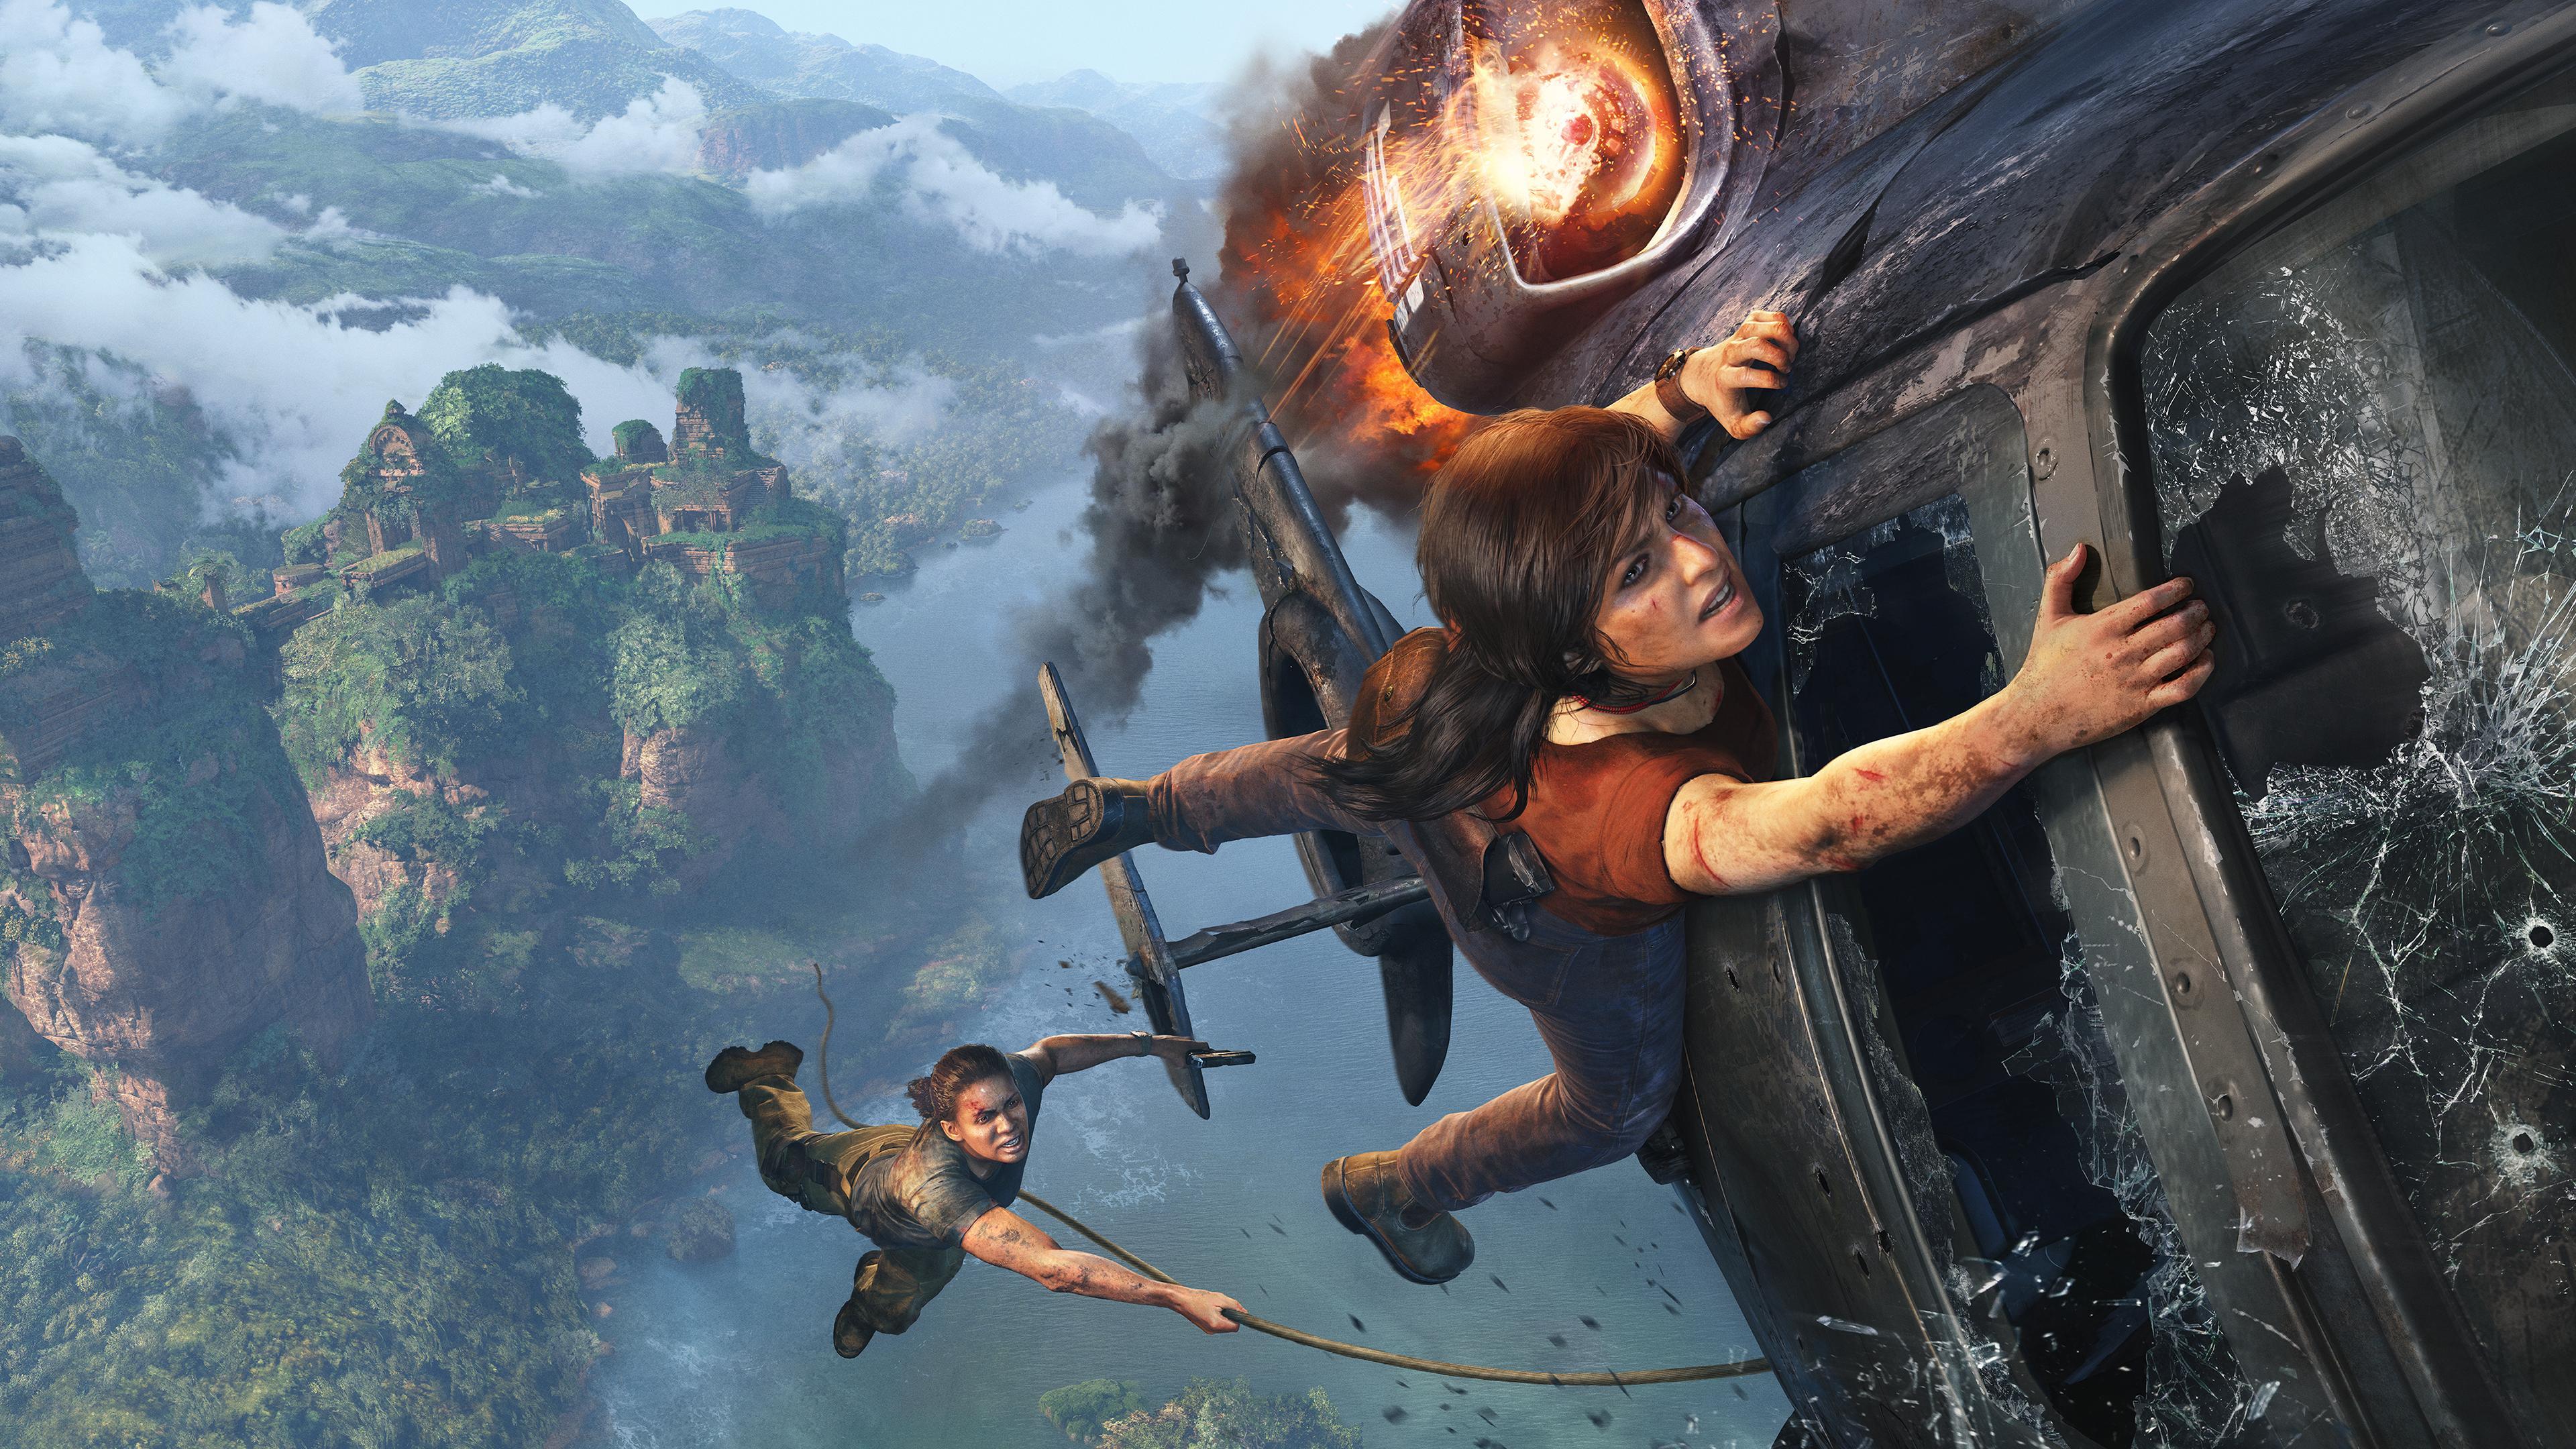 Wallpaper ID: 63690 / uncharted 4, games, pc games, ps games, xbox games  Wallpaper